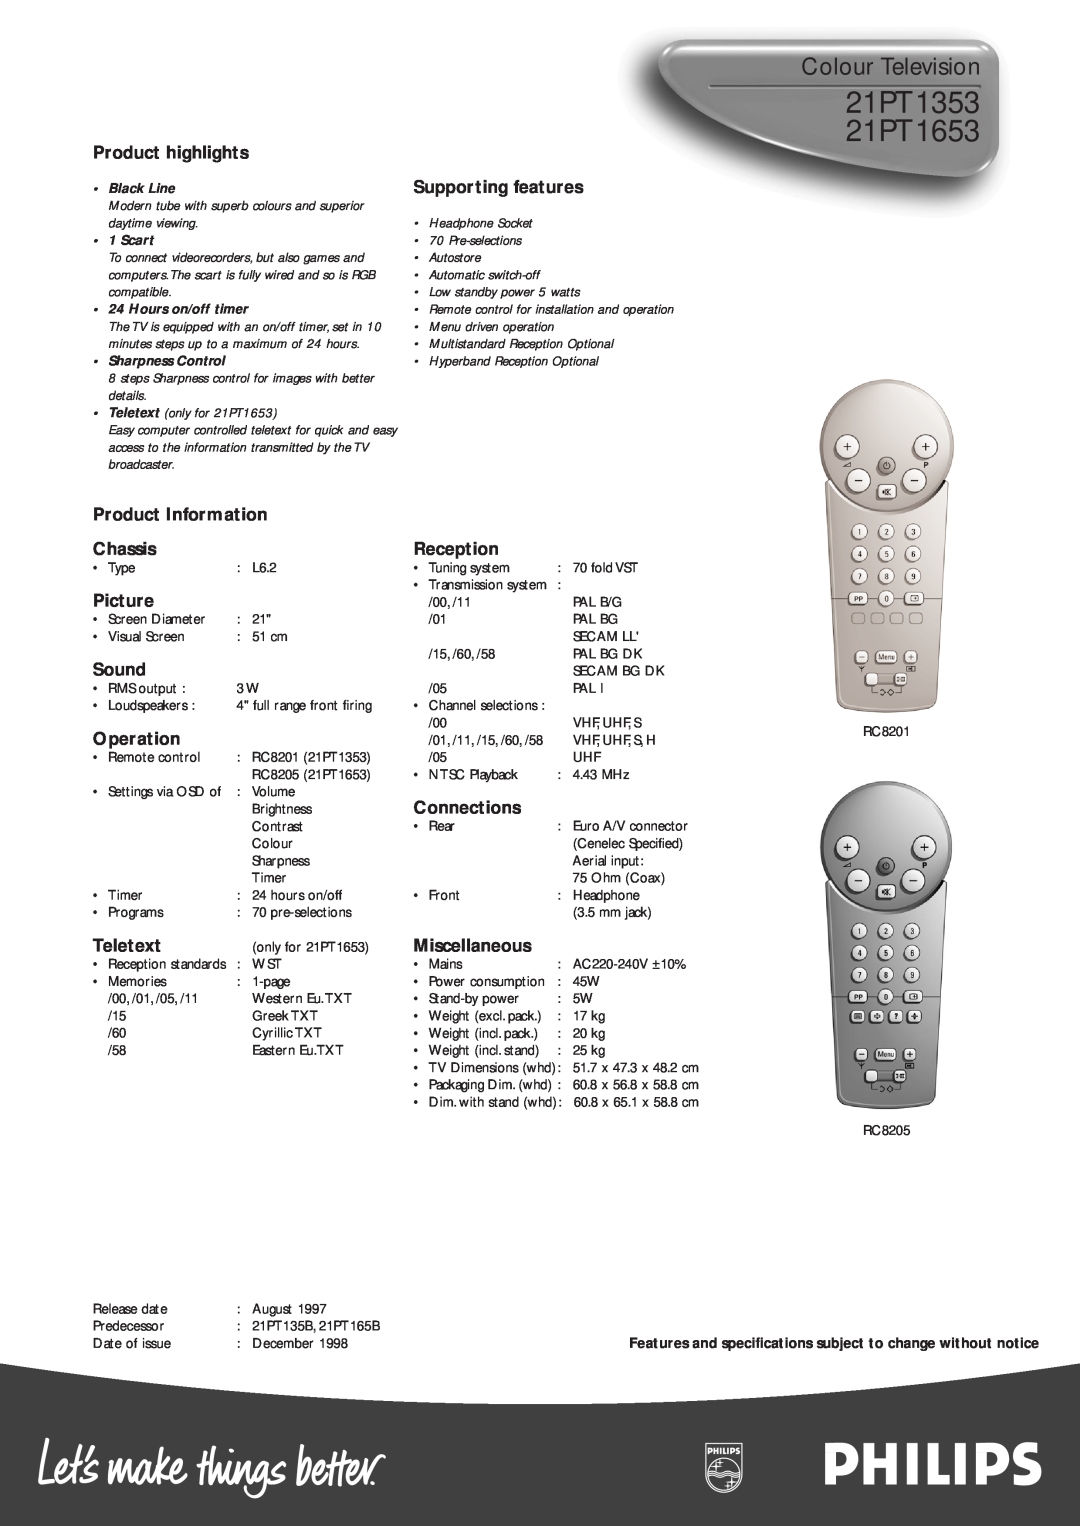 Philips 21PT1353 Product highlights, Supporting features, Product Information, Chassis, Reception, Picture, Sound, Scart 